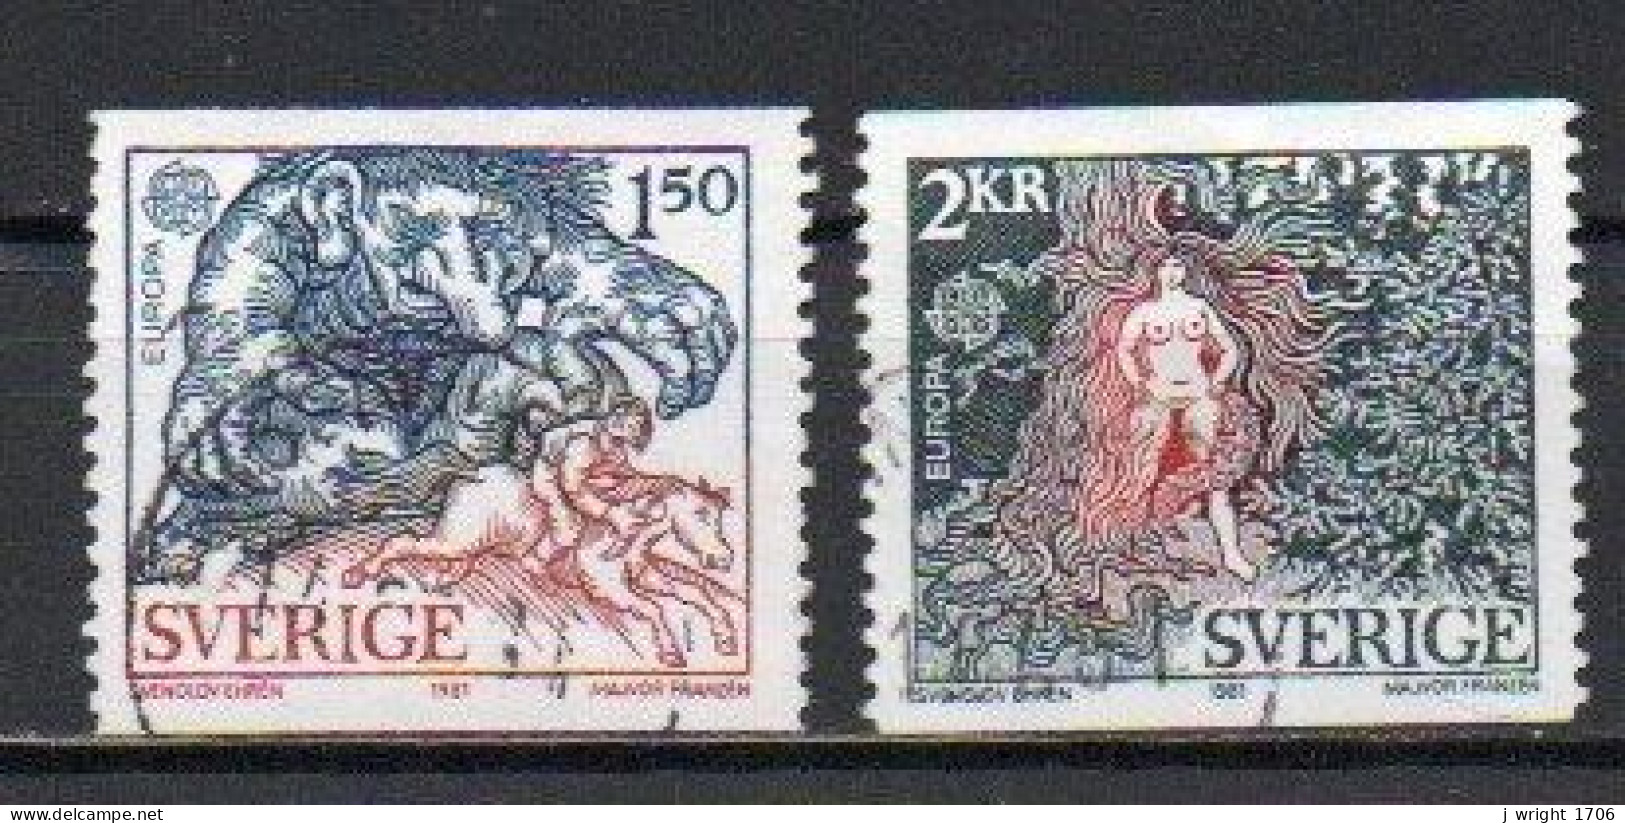 Sweden, 1981, Europa CEPT, Set, USED - Used Stamps